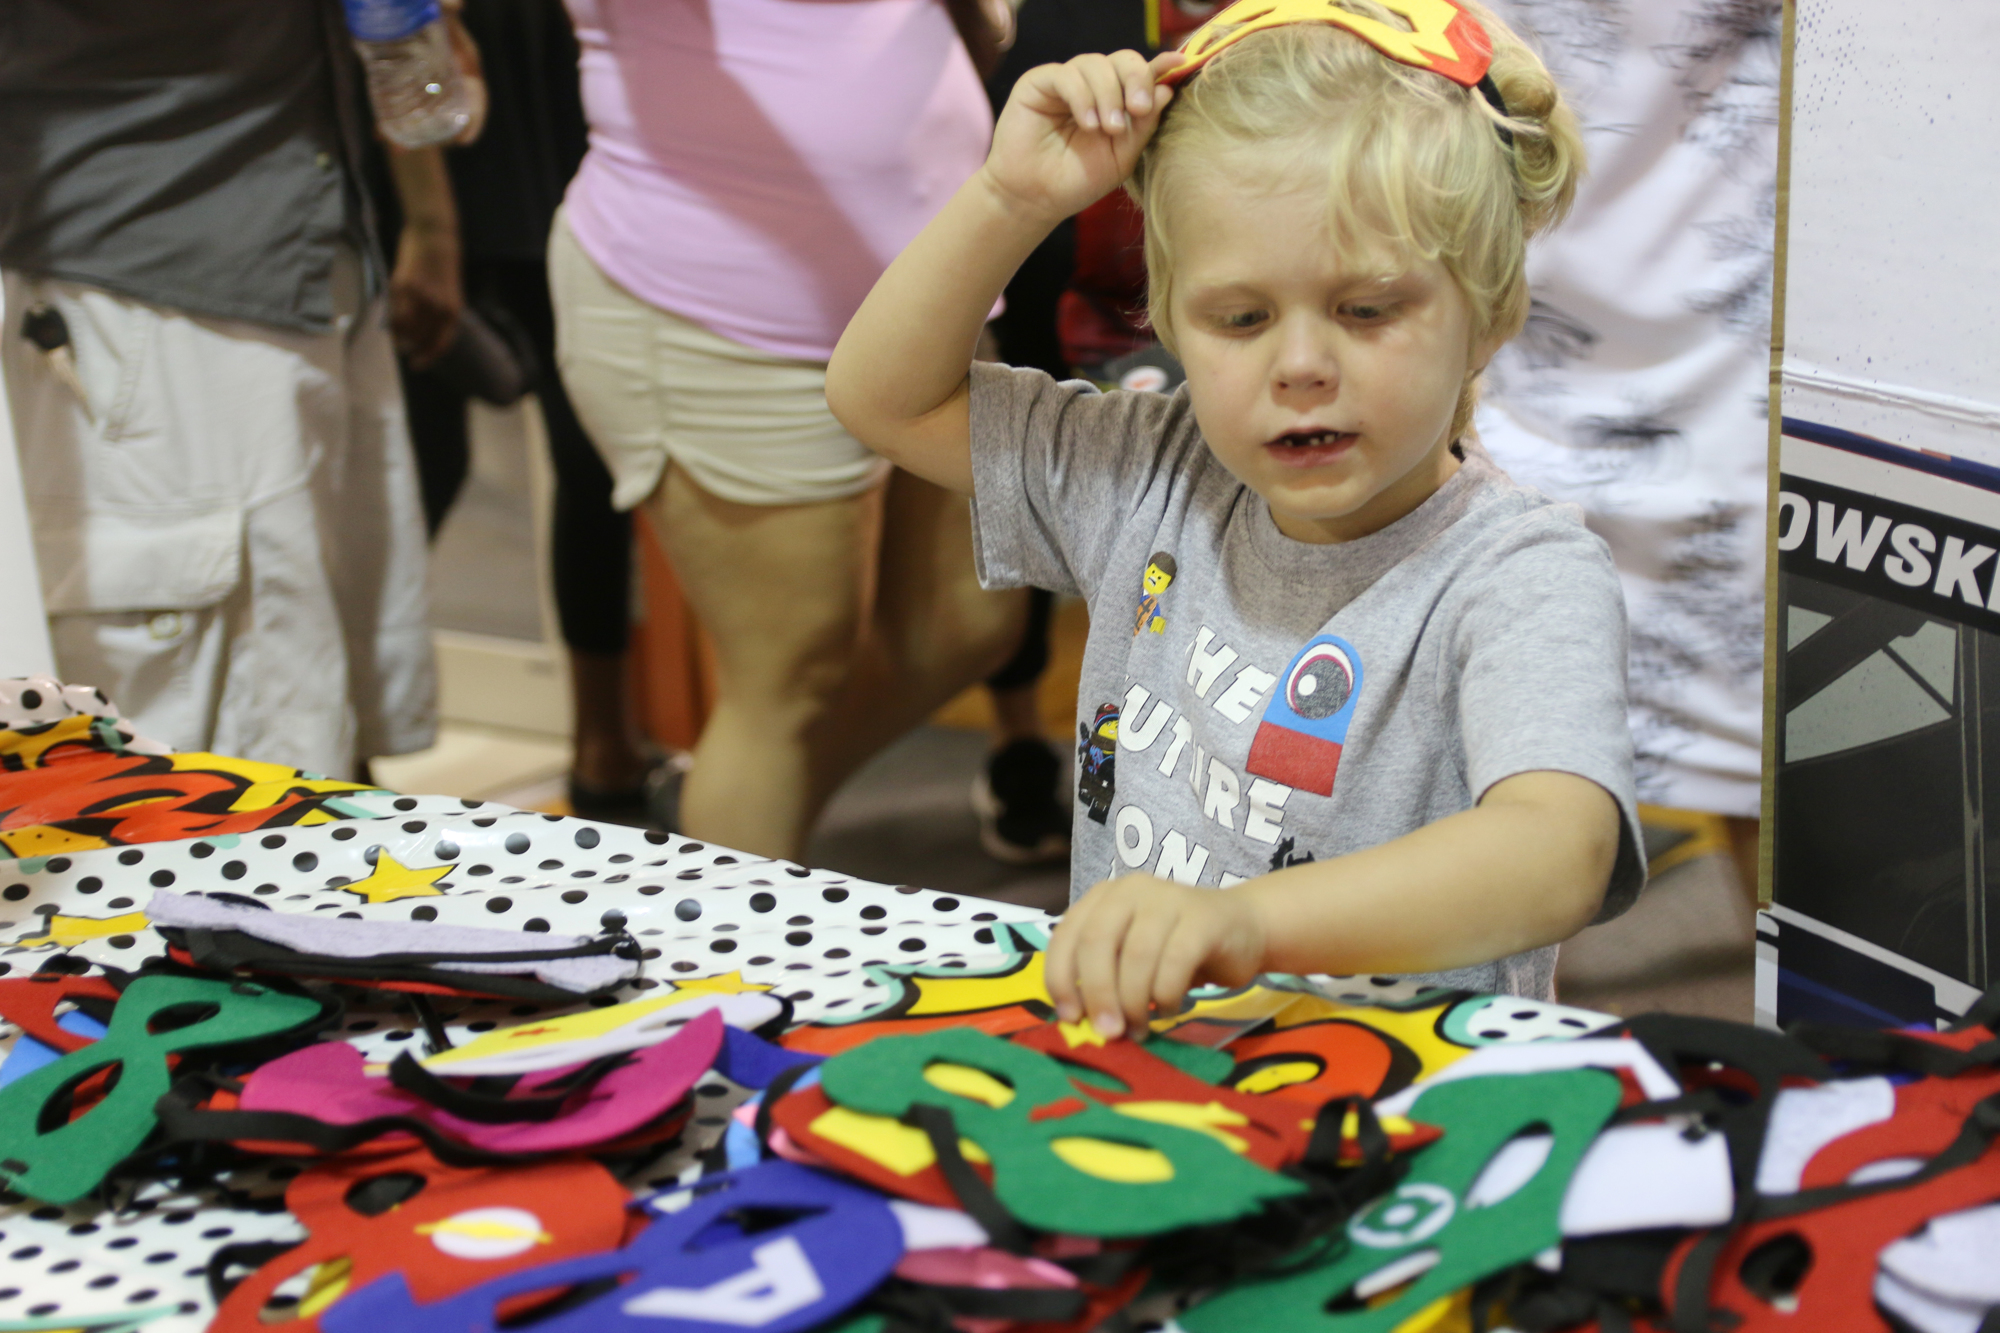 Brandon McClammy tries on masks during the annual National Night Out event on Tuesday, Aug. 6. Photo by Jarleene Almenas